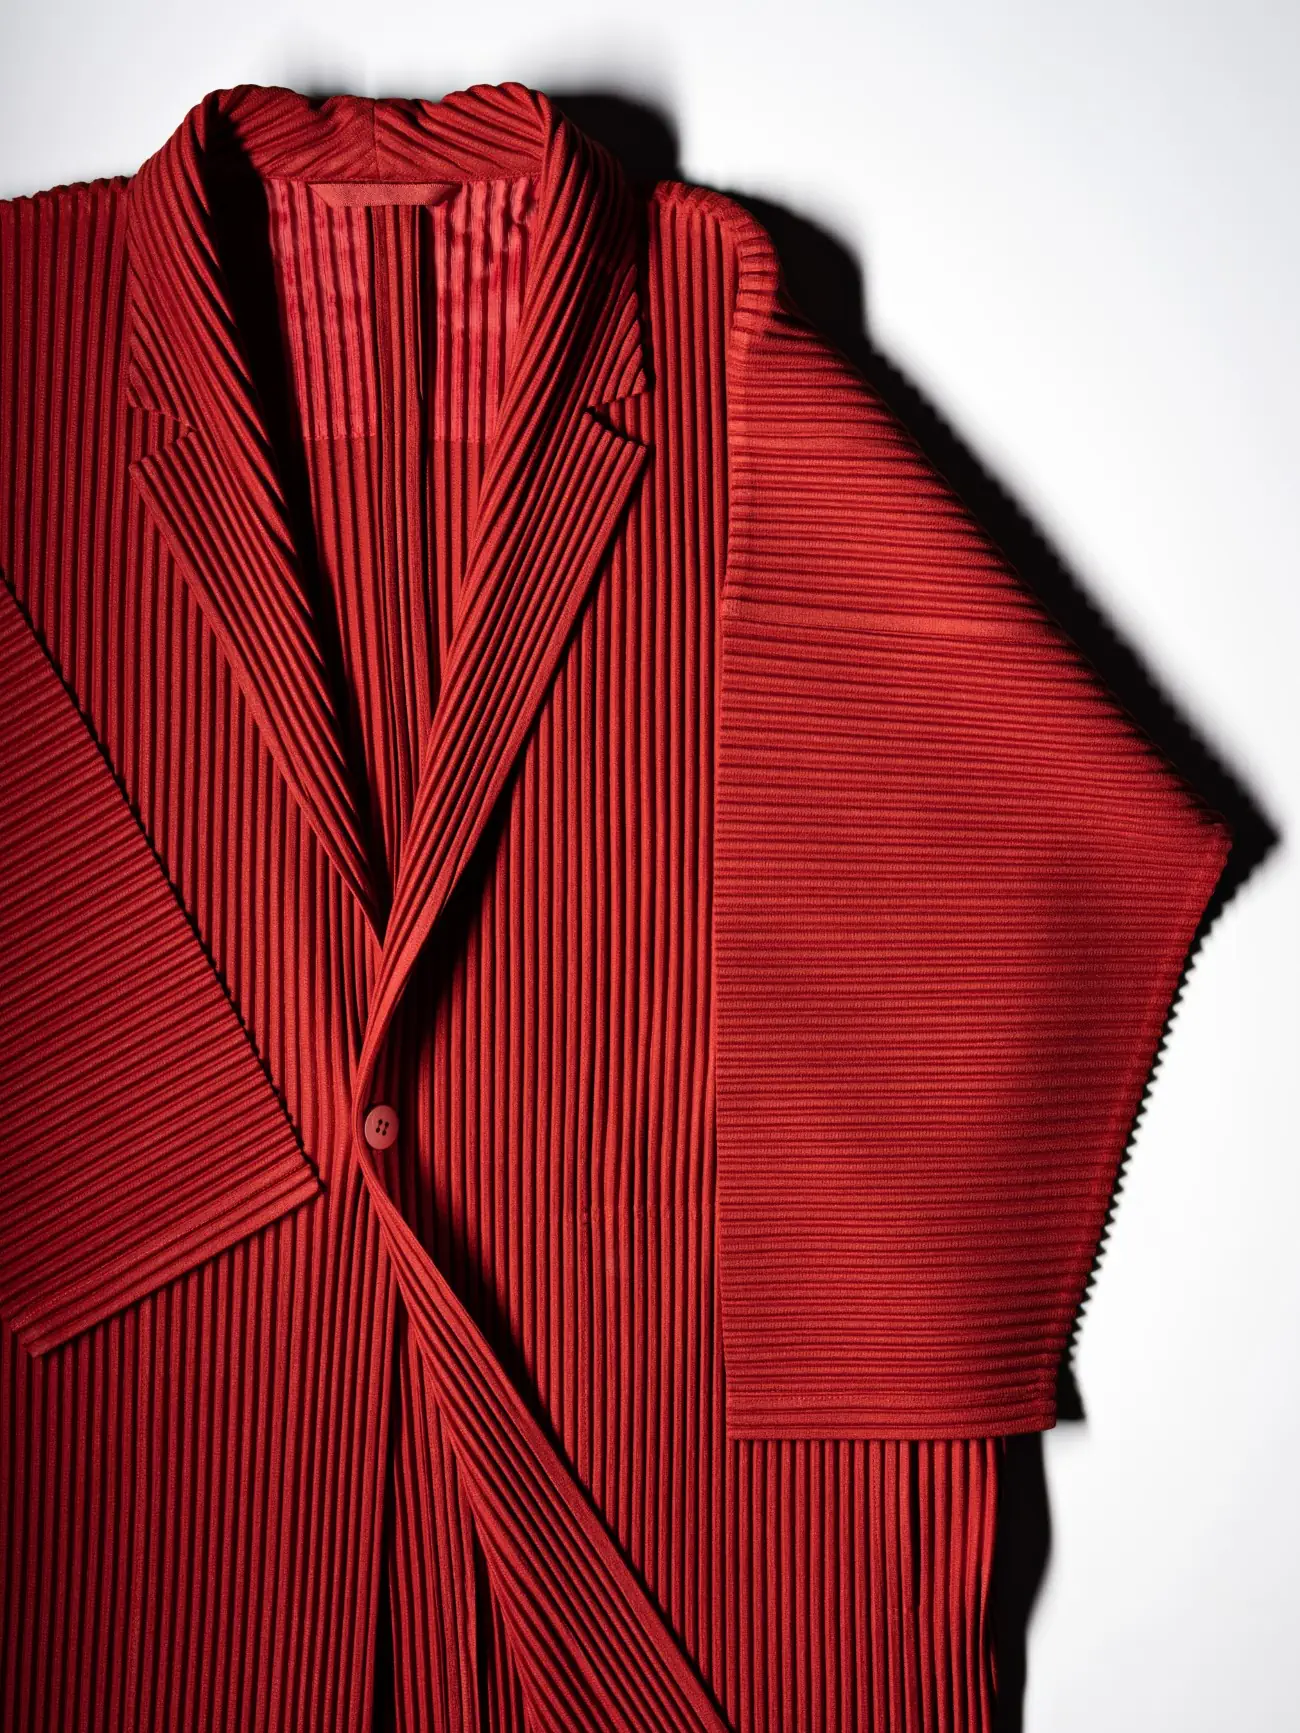 Celebrating a decade with HOMME PLISSÉ ISSEY MIYAKE